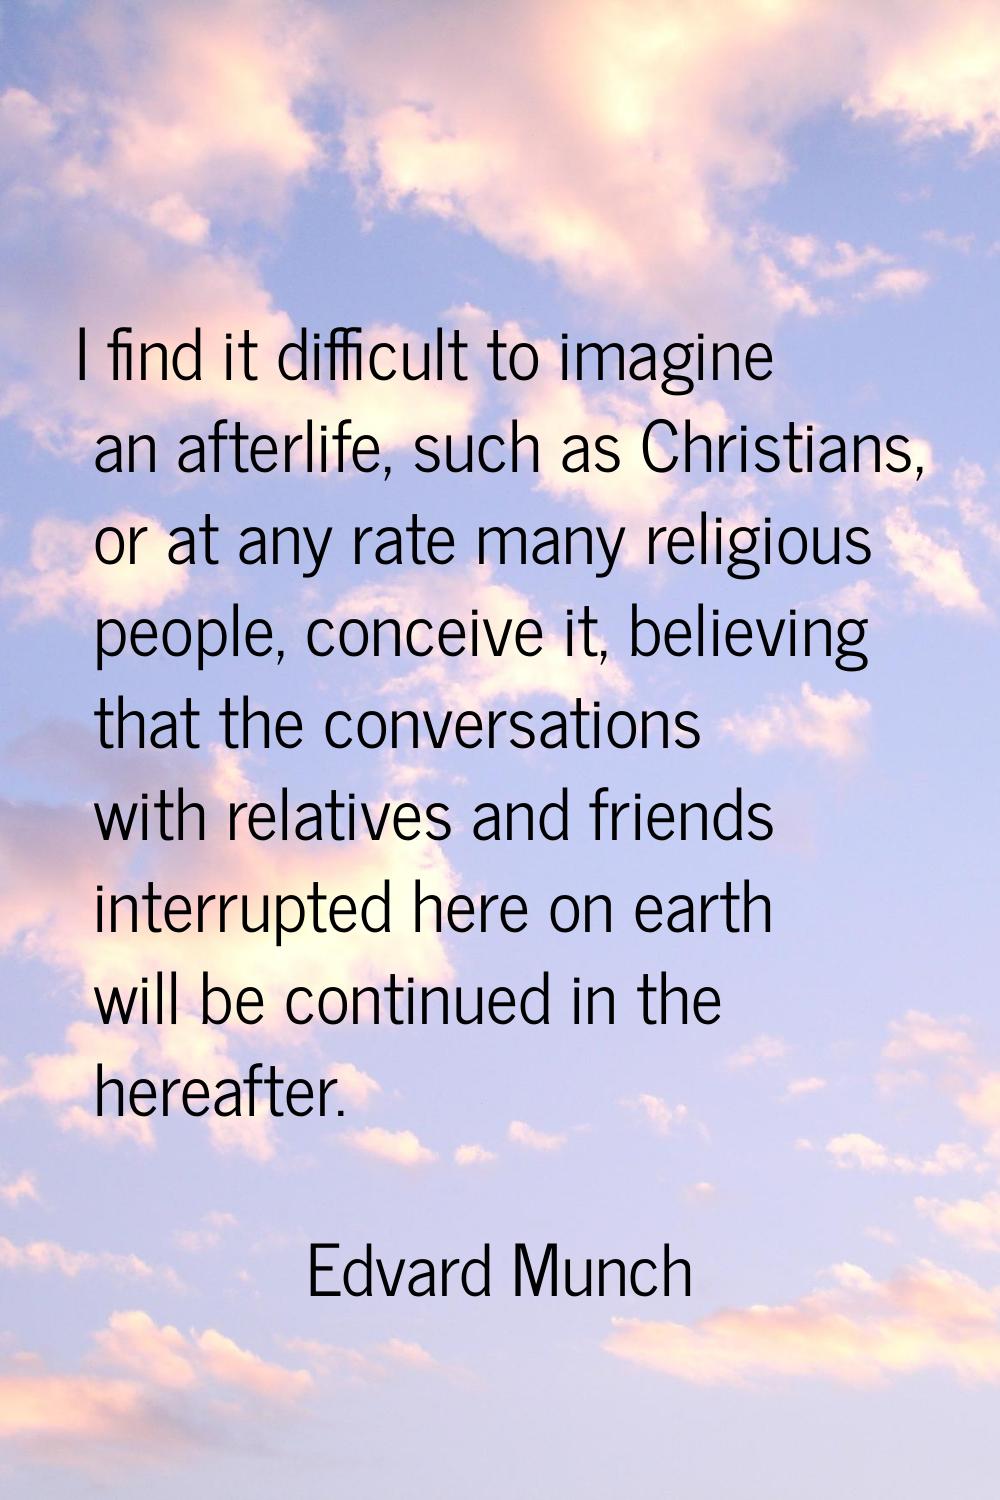 I find it difficult to imagine an afterlife, such as Christians, or at any rate many religious peop